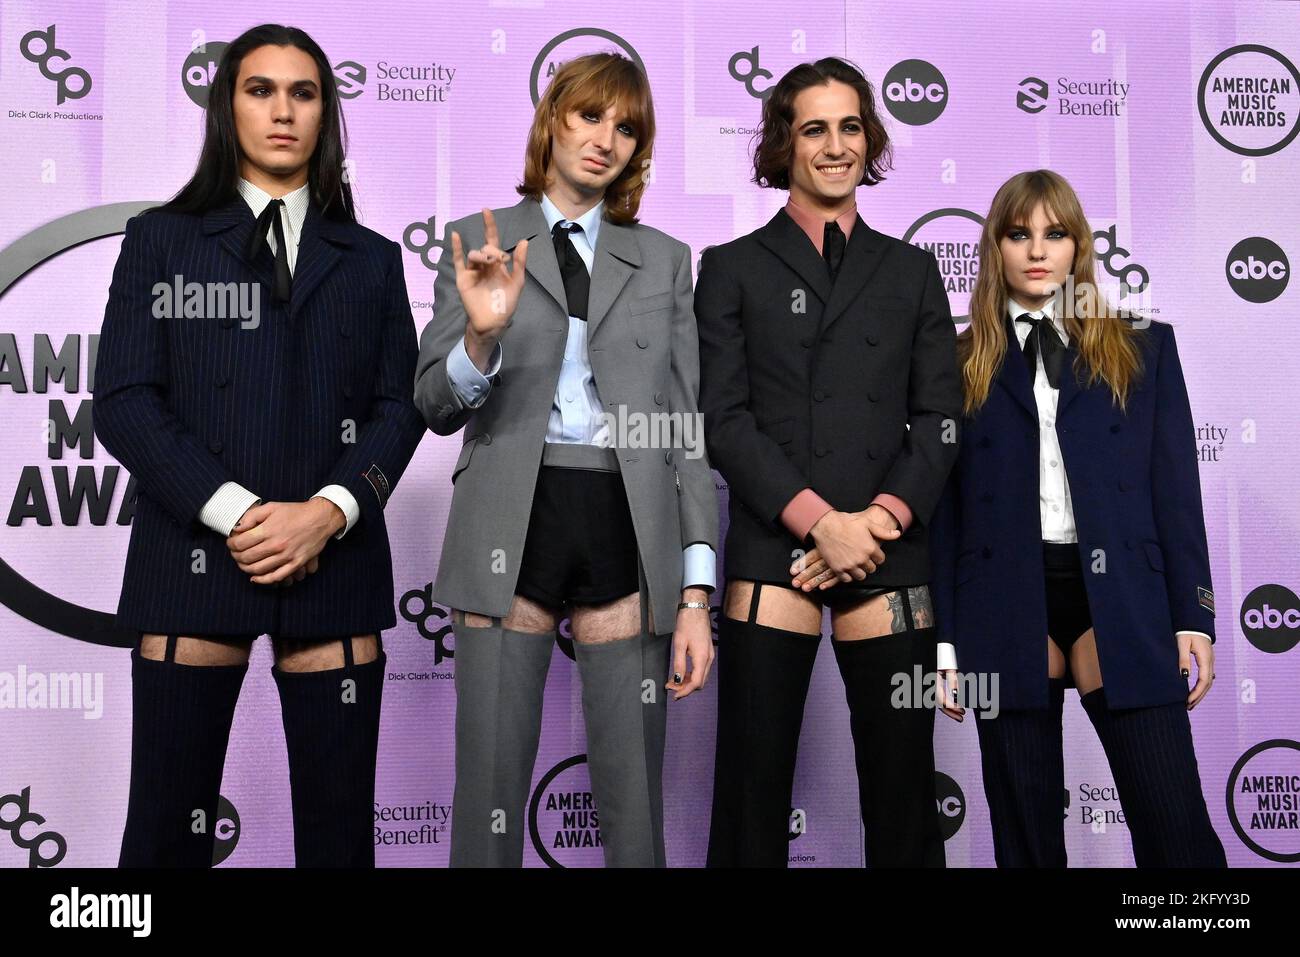 Los Angeles, United States. 20th Nov, 2022. (L-R) Ethan Torchio, Thomas Raggi, Damiano David and Victoria De Angelis of Måneskin arrive for the 50th annual American Music Awards at the Microsoft Theater in Los Angeles on Sunday, November 20, 2022. Photo by Jim Ruymen/UPI Credit: UPI/Alamy Live News Stock Photo